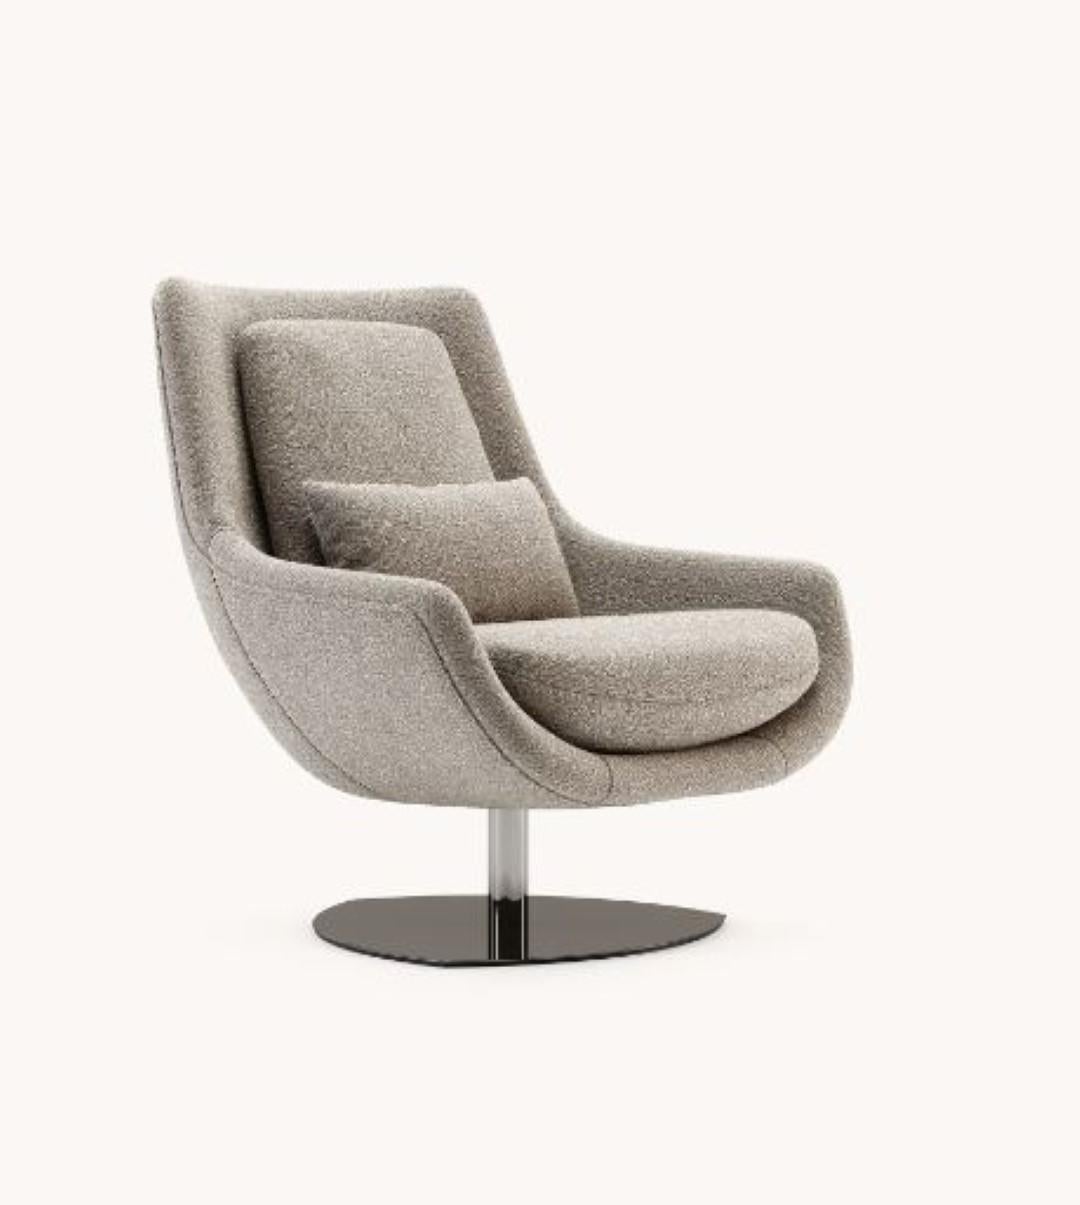 Elba armchair by Domkapa
Materials: Bouclé, Polished Stainless Steel.
Dimensions: W 87 x D 88 x H 100 cm. 
Also available in different materials. Please contact us.
* with 1 pillow included in the same fabric as the structure (50x30